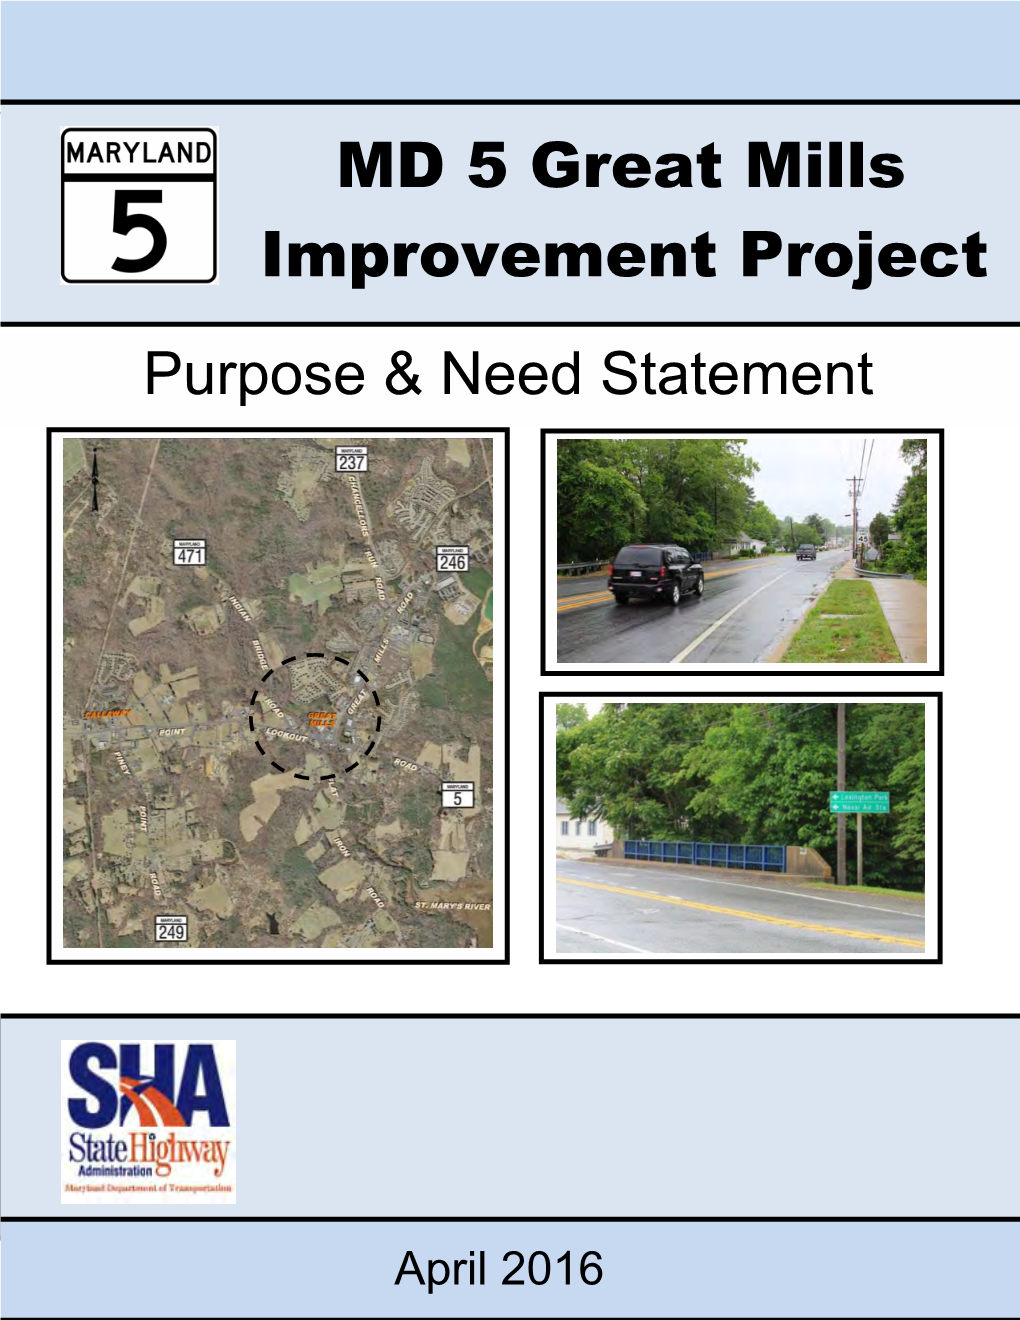 MD 5 Great Mills Improvement Project Purpose and Need Statement